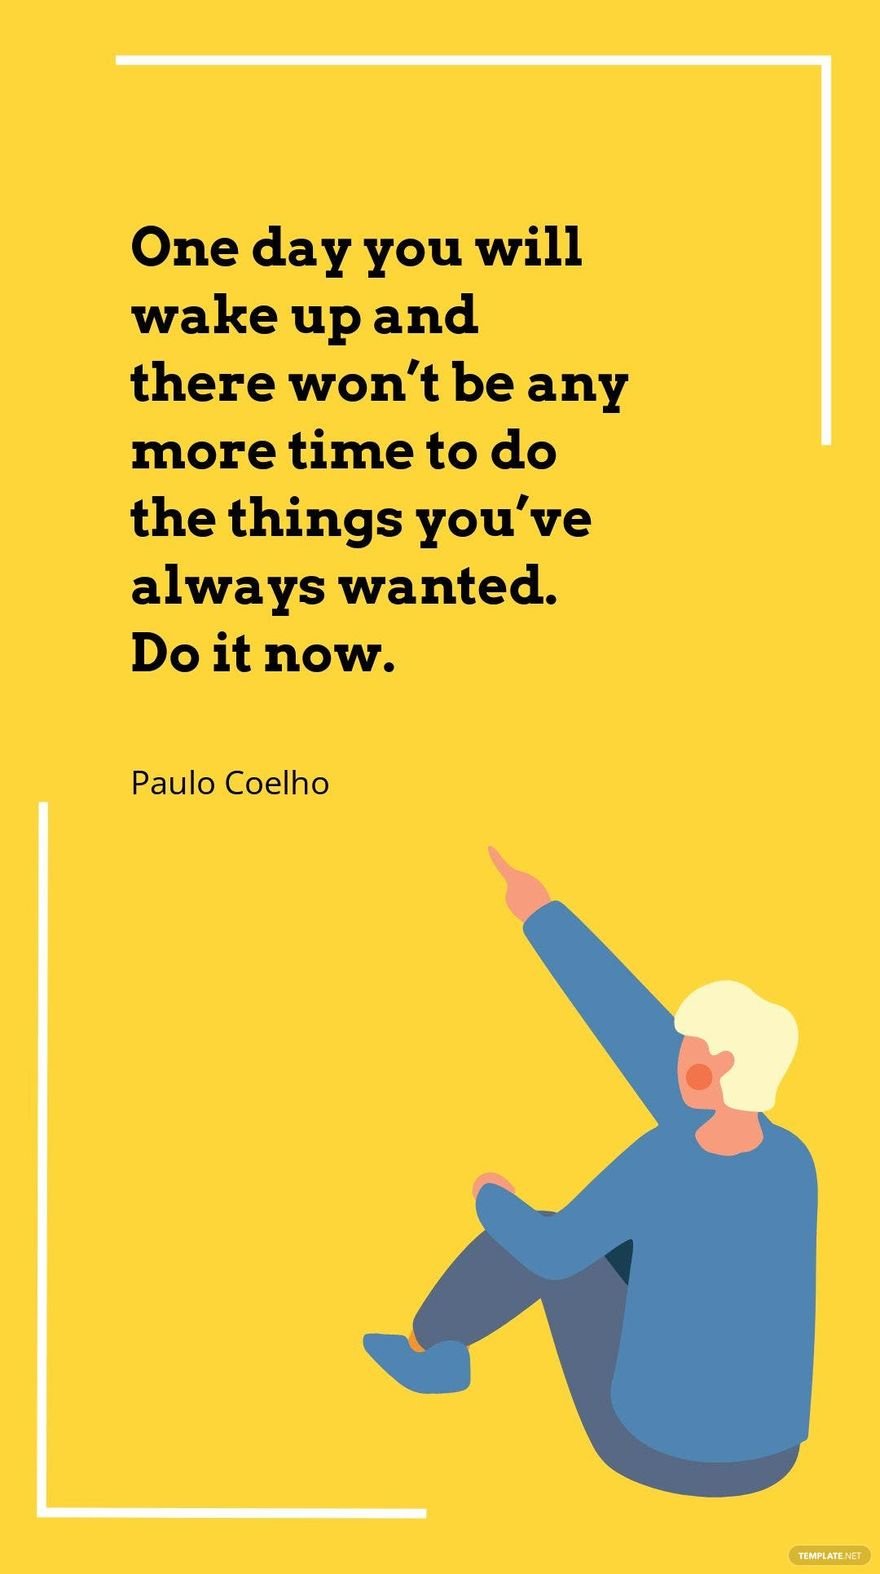 Paulo Coelho - One day you will wake up and there won’t be any more time to do the things you’ve always wanted. Do it now.